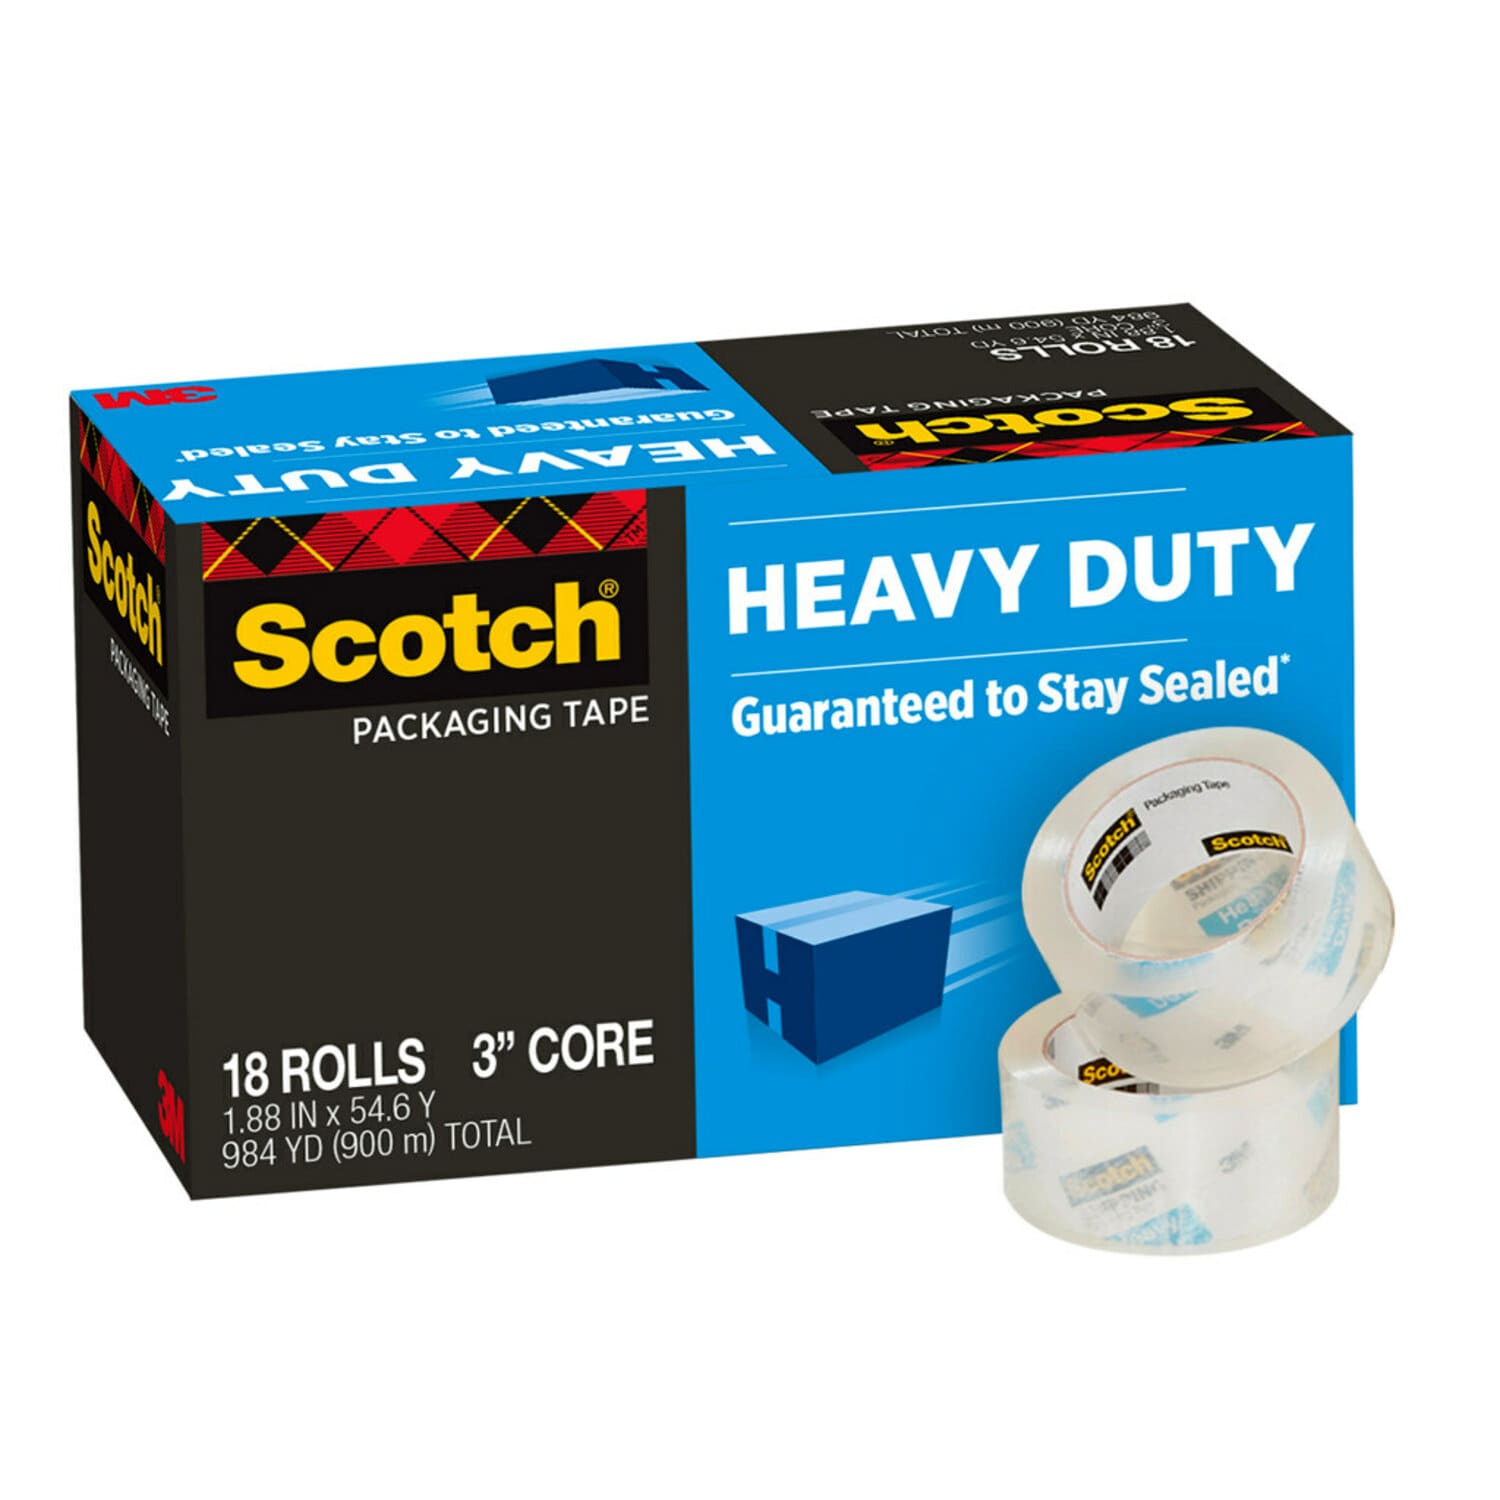 7100159385 - Scotch Heavy Duty Shipping Packaging Tape, 3850-18CP, 1.88 in x 54.6 yd (48 mm x 50 m), 18 Pack